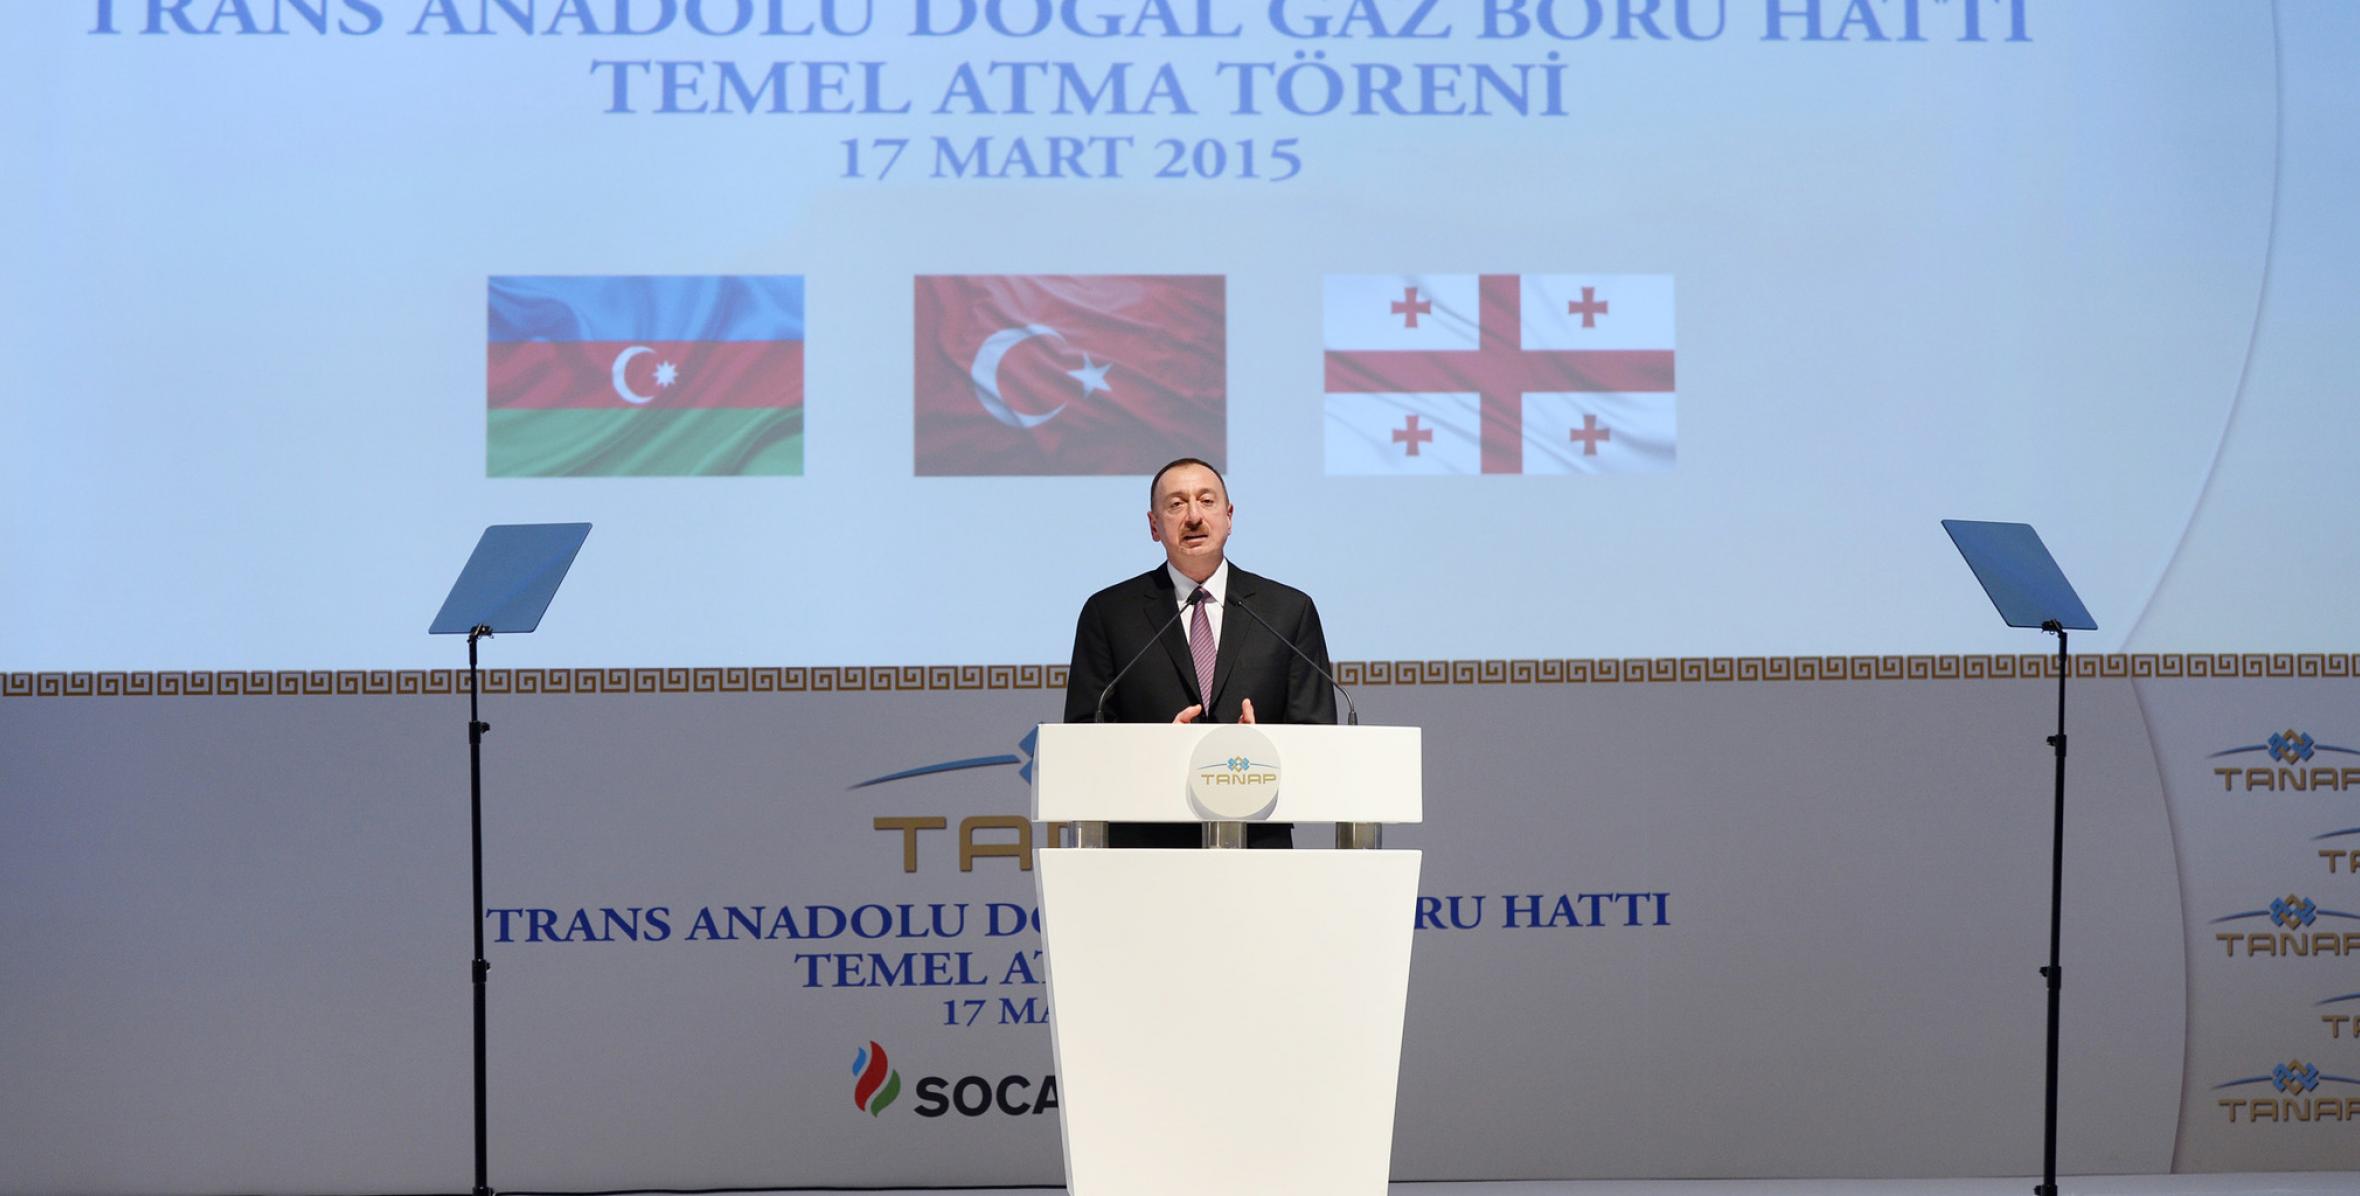 Speech by Ilham Aliyev at the groundbreaking of the Trans-Anatolian Natural Gas Pipeline